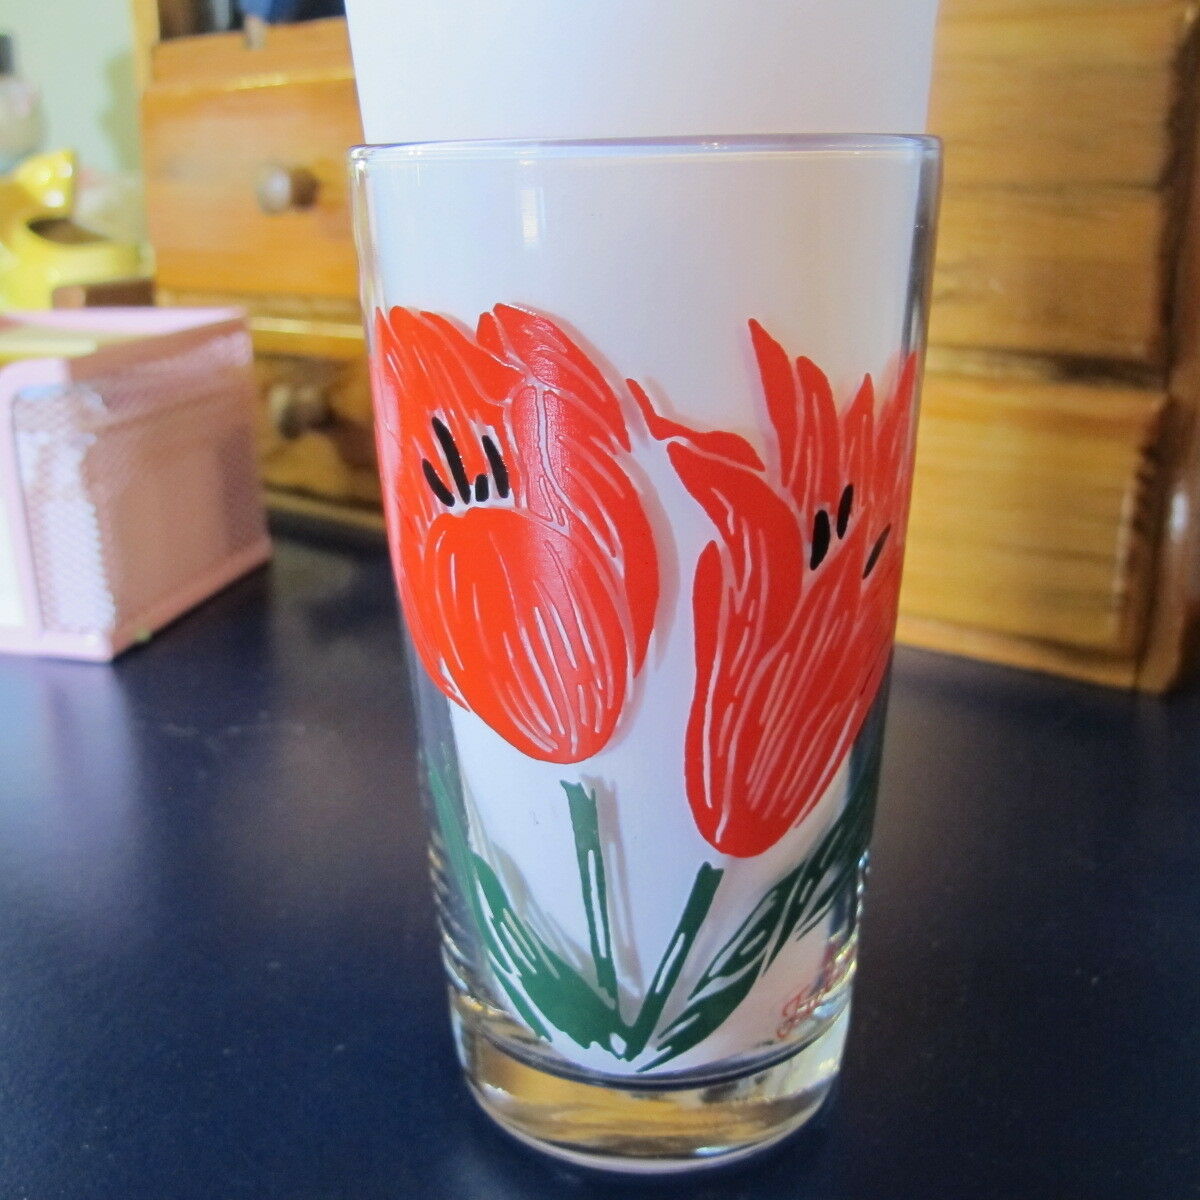 Vintage Boscul Peanut Butter Red Tulips Ice Tea Glass 5 Inch Tall Name At Bottom